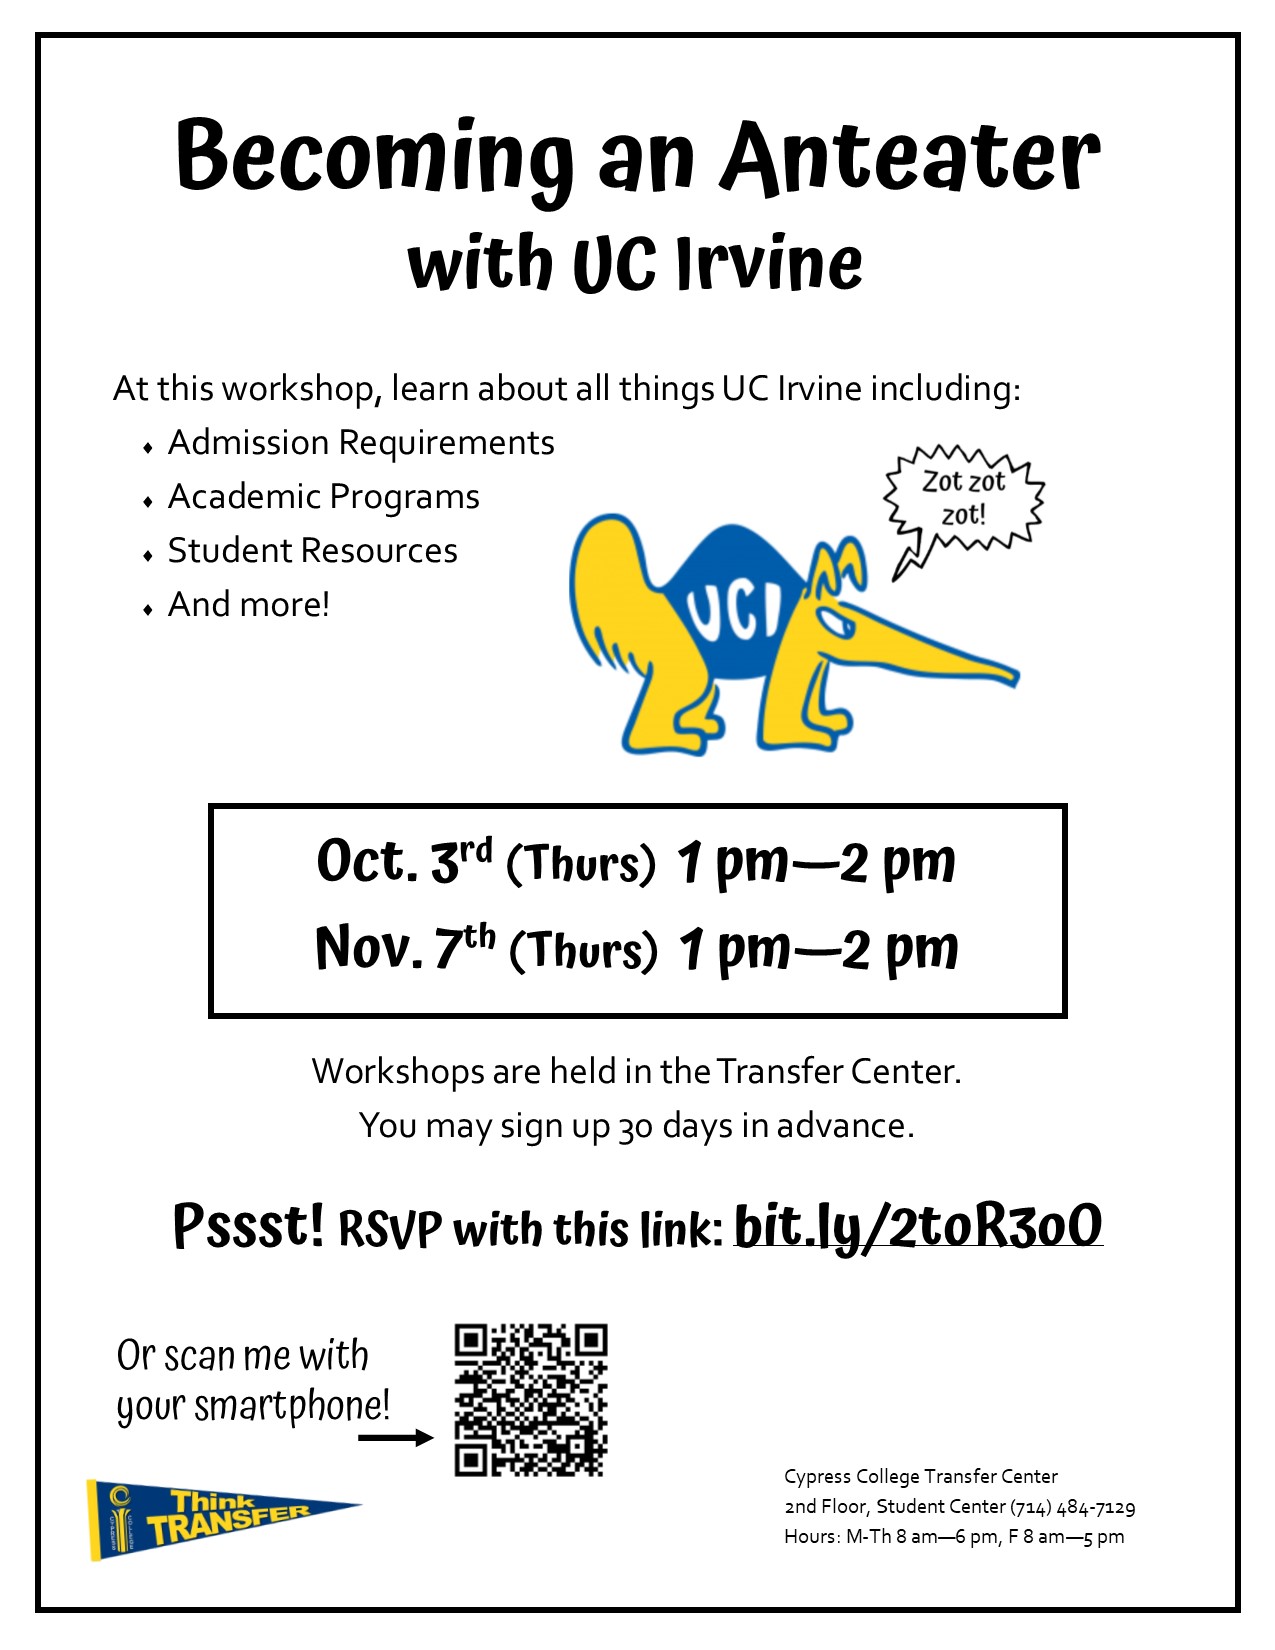 Becoming an Anteater with UC Irvine flyer